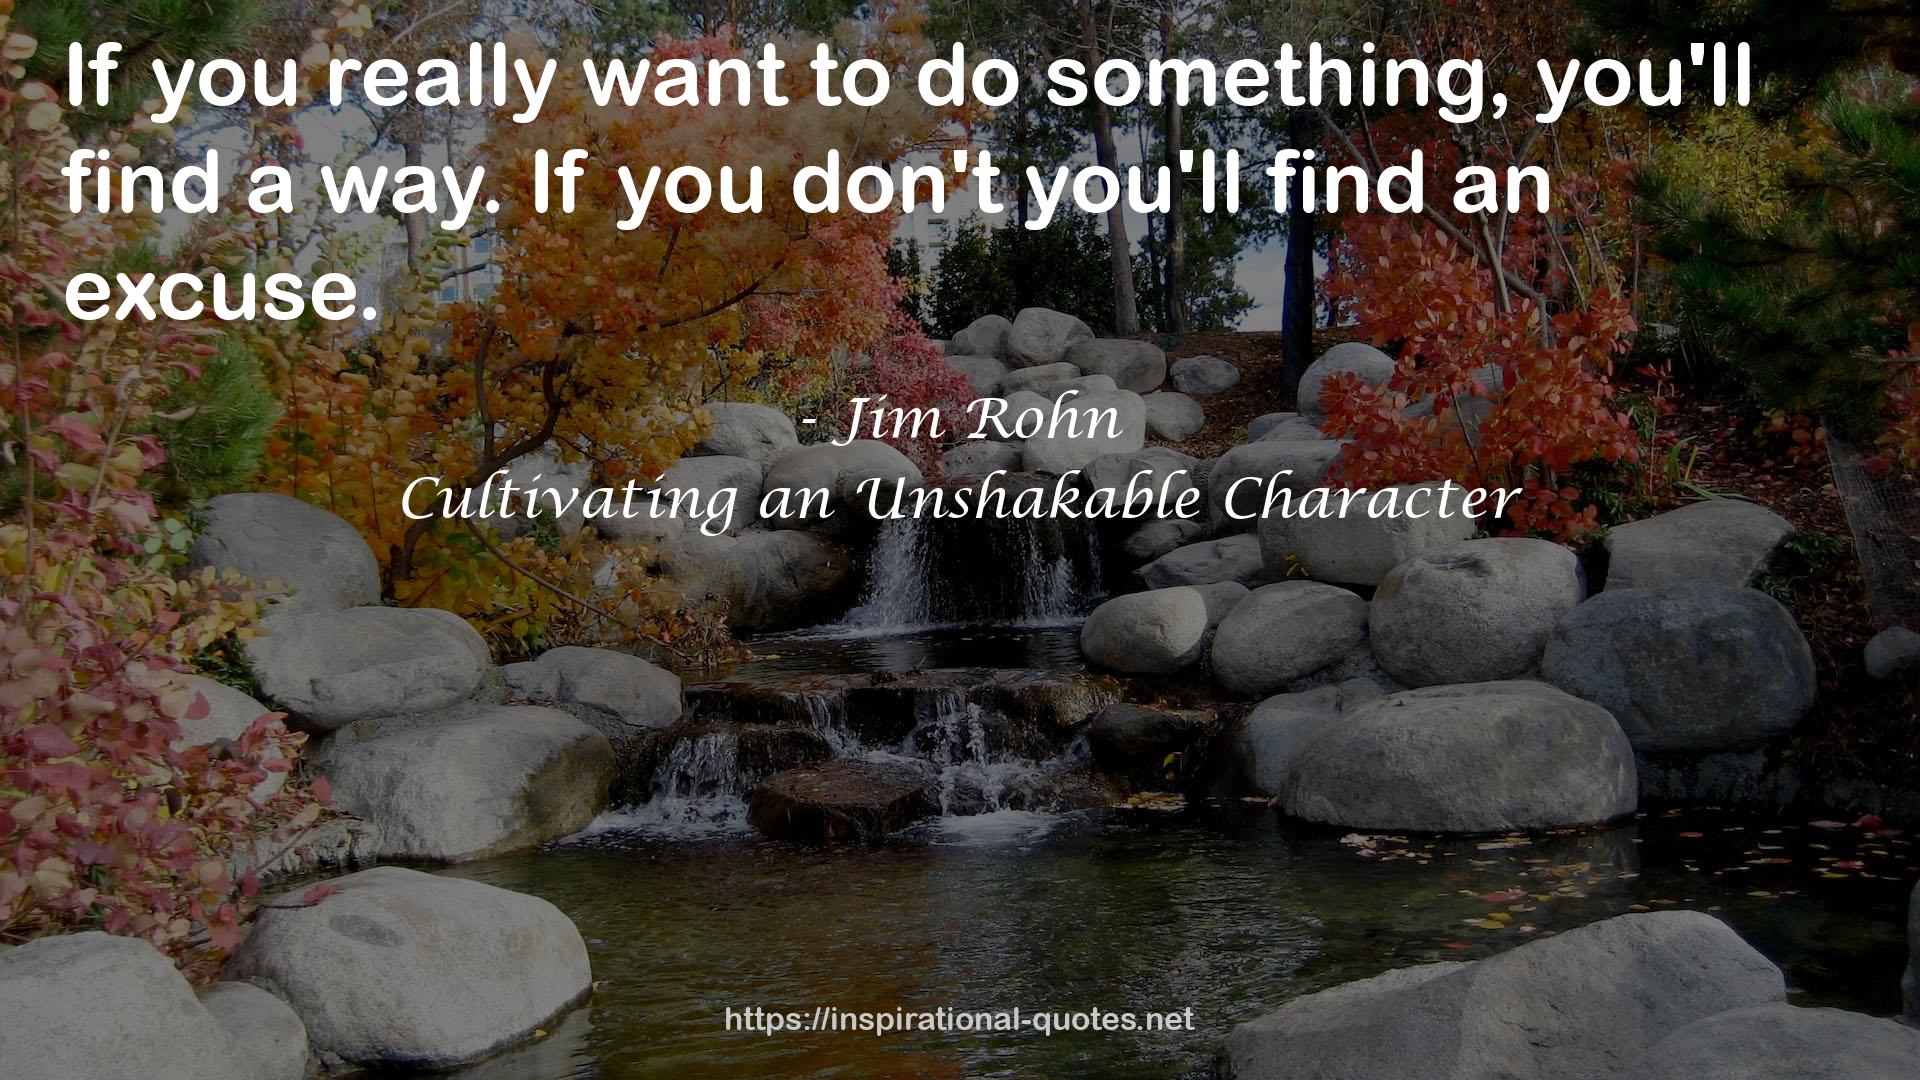 Cultivating an Unshakable Character QUOTES